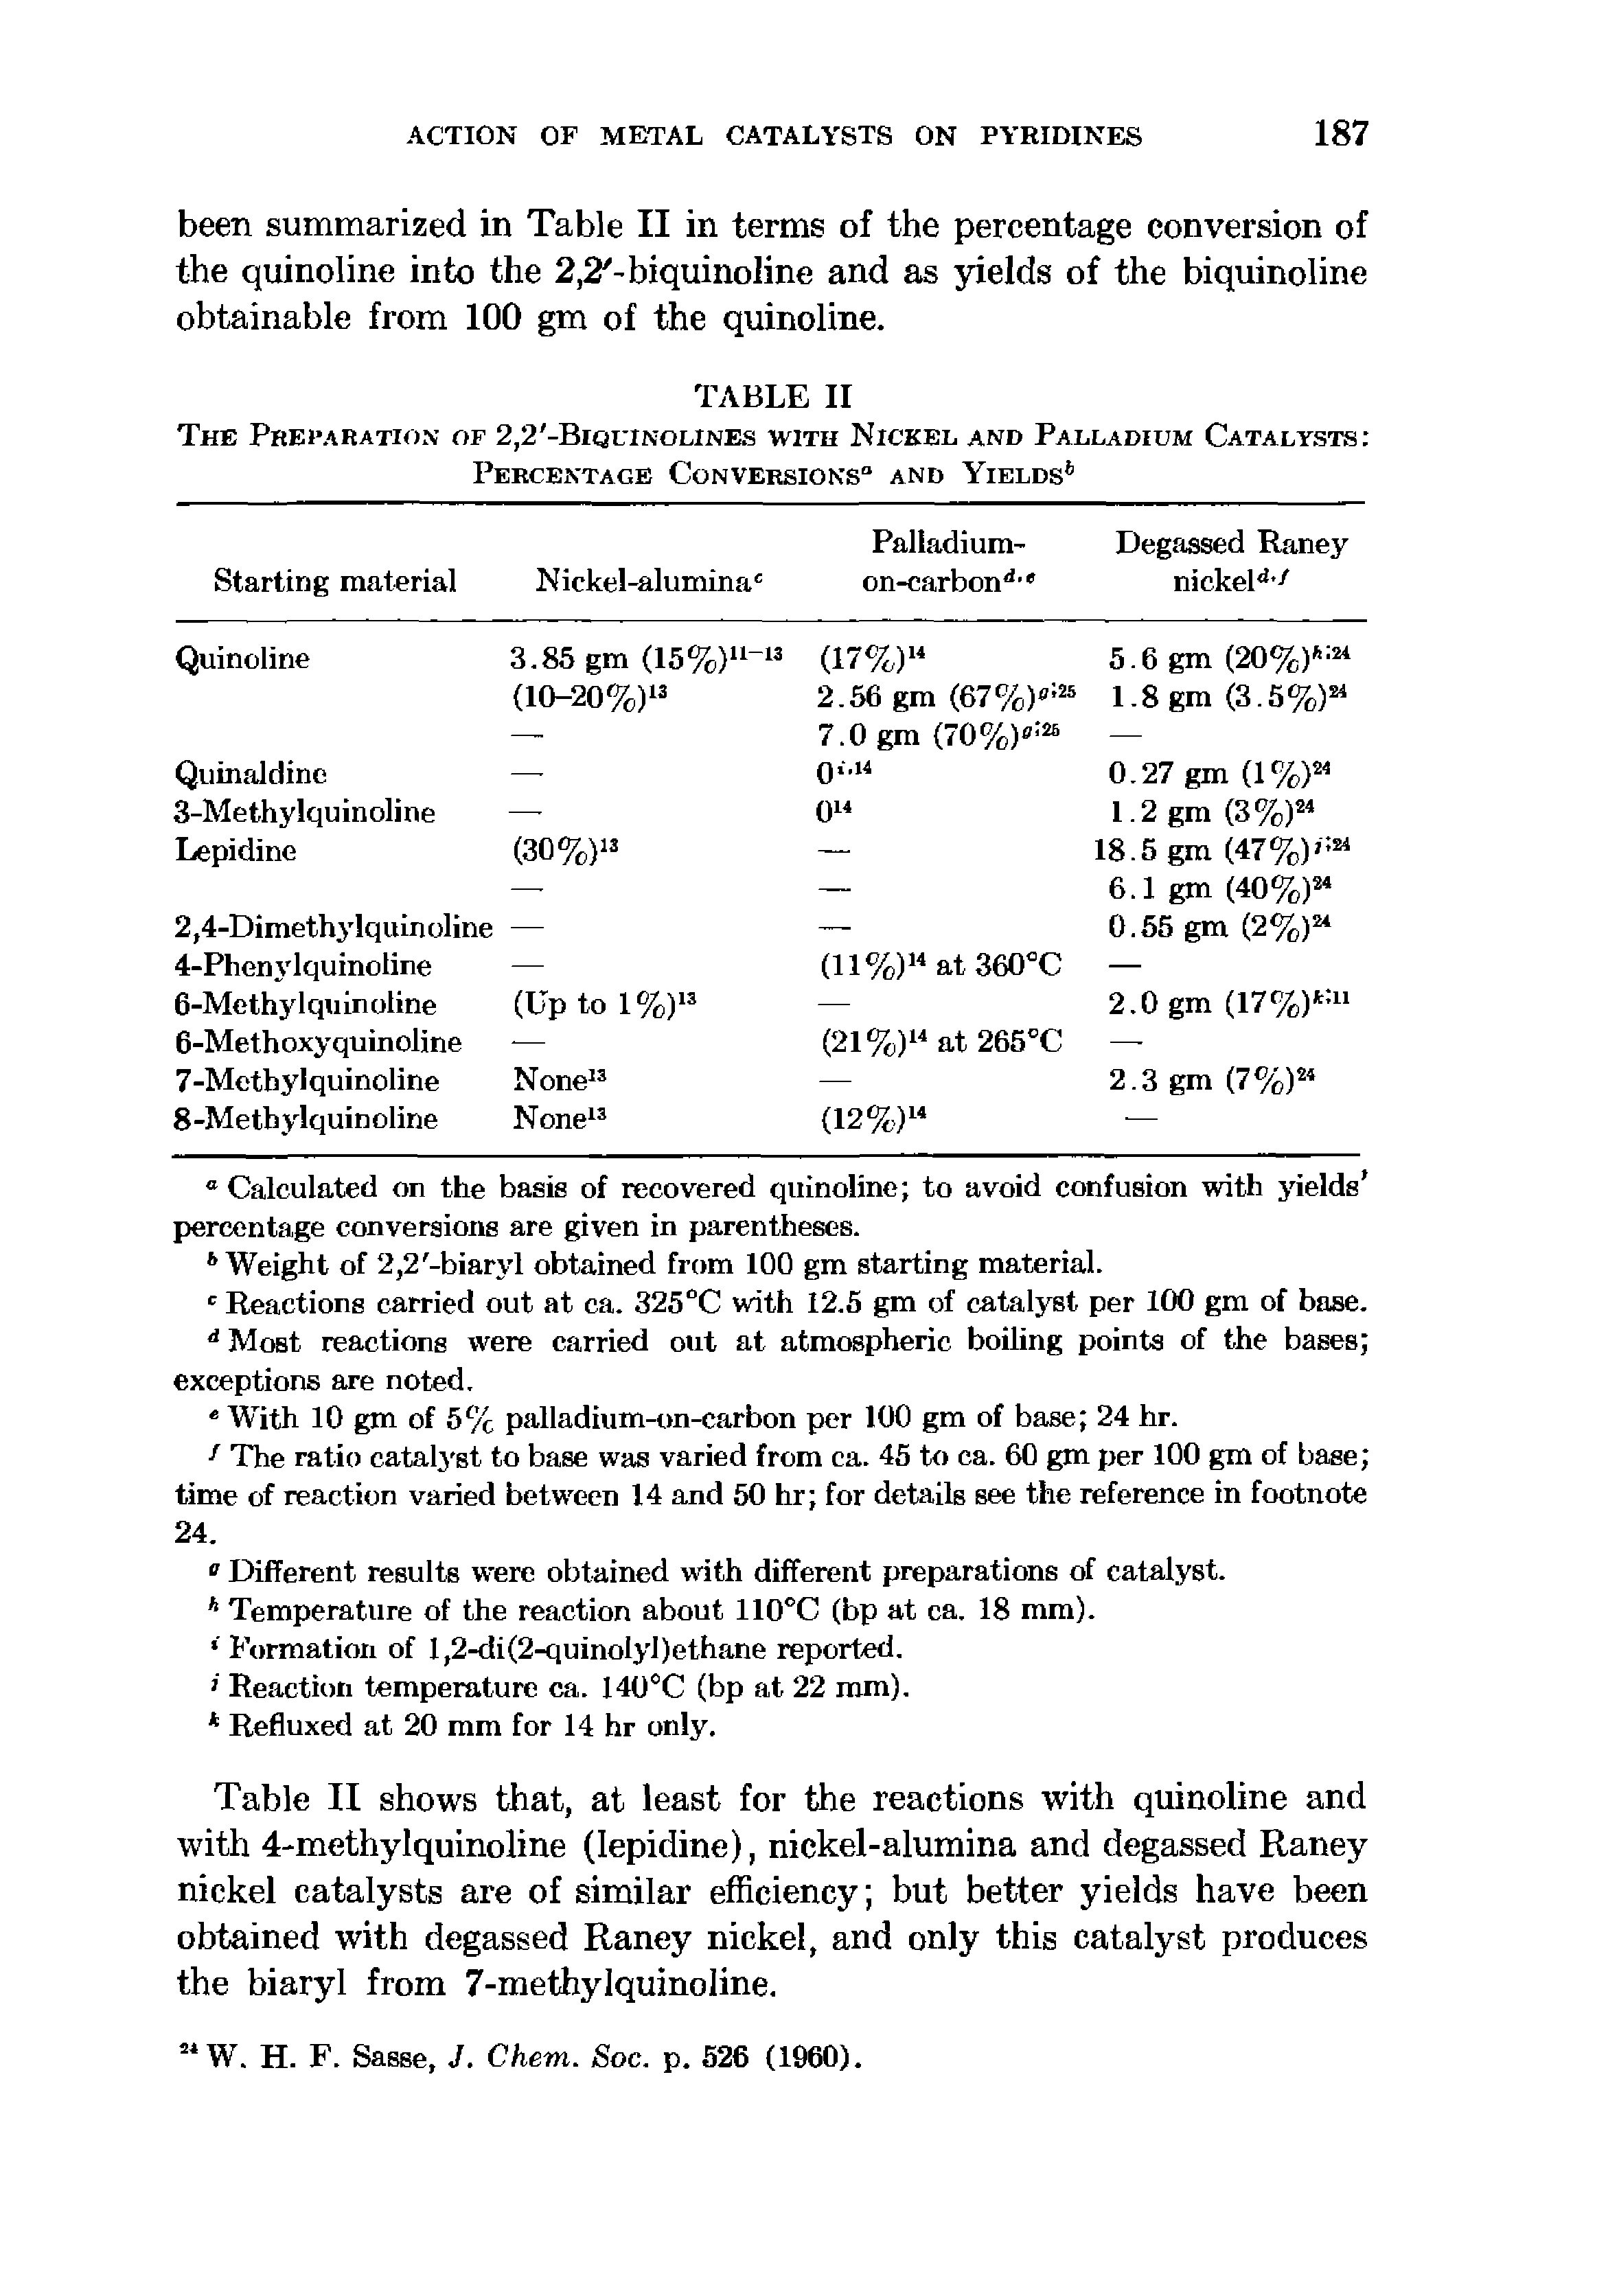 Table II shows that, at least for the reactions with quinoline and with 4-methylquinoline (lepidine), nickel-alumina and degassed Raney nickel catalysts are of similar efficiency but better yields have been obtained with degassed Raney nickel, and only this catalyst produces the biaryl from 7-methyIquinoIine.